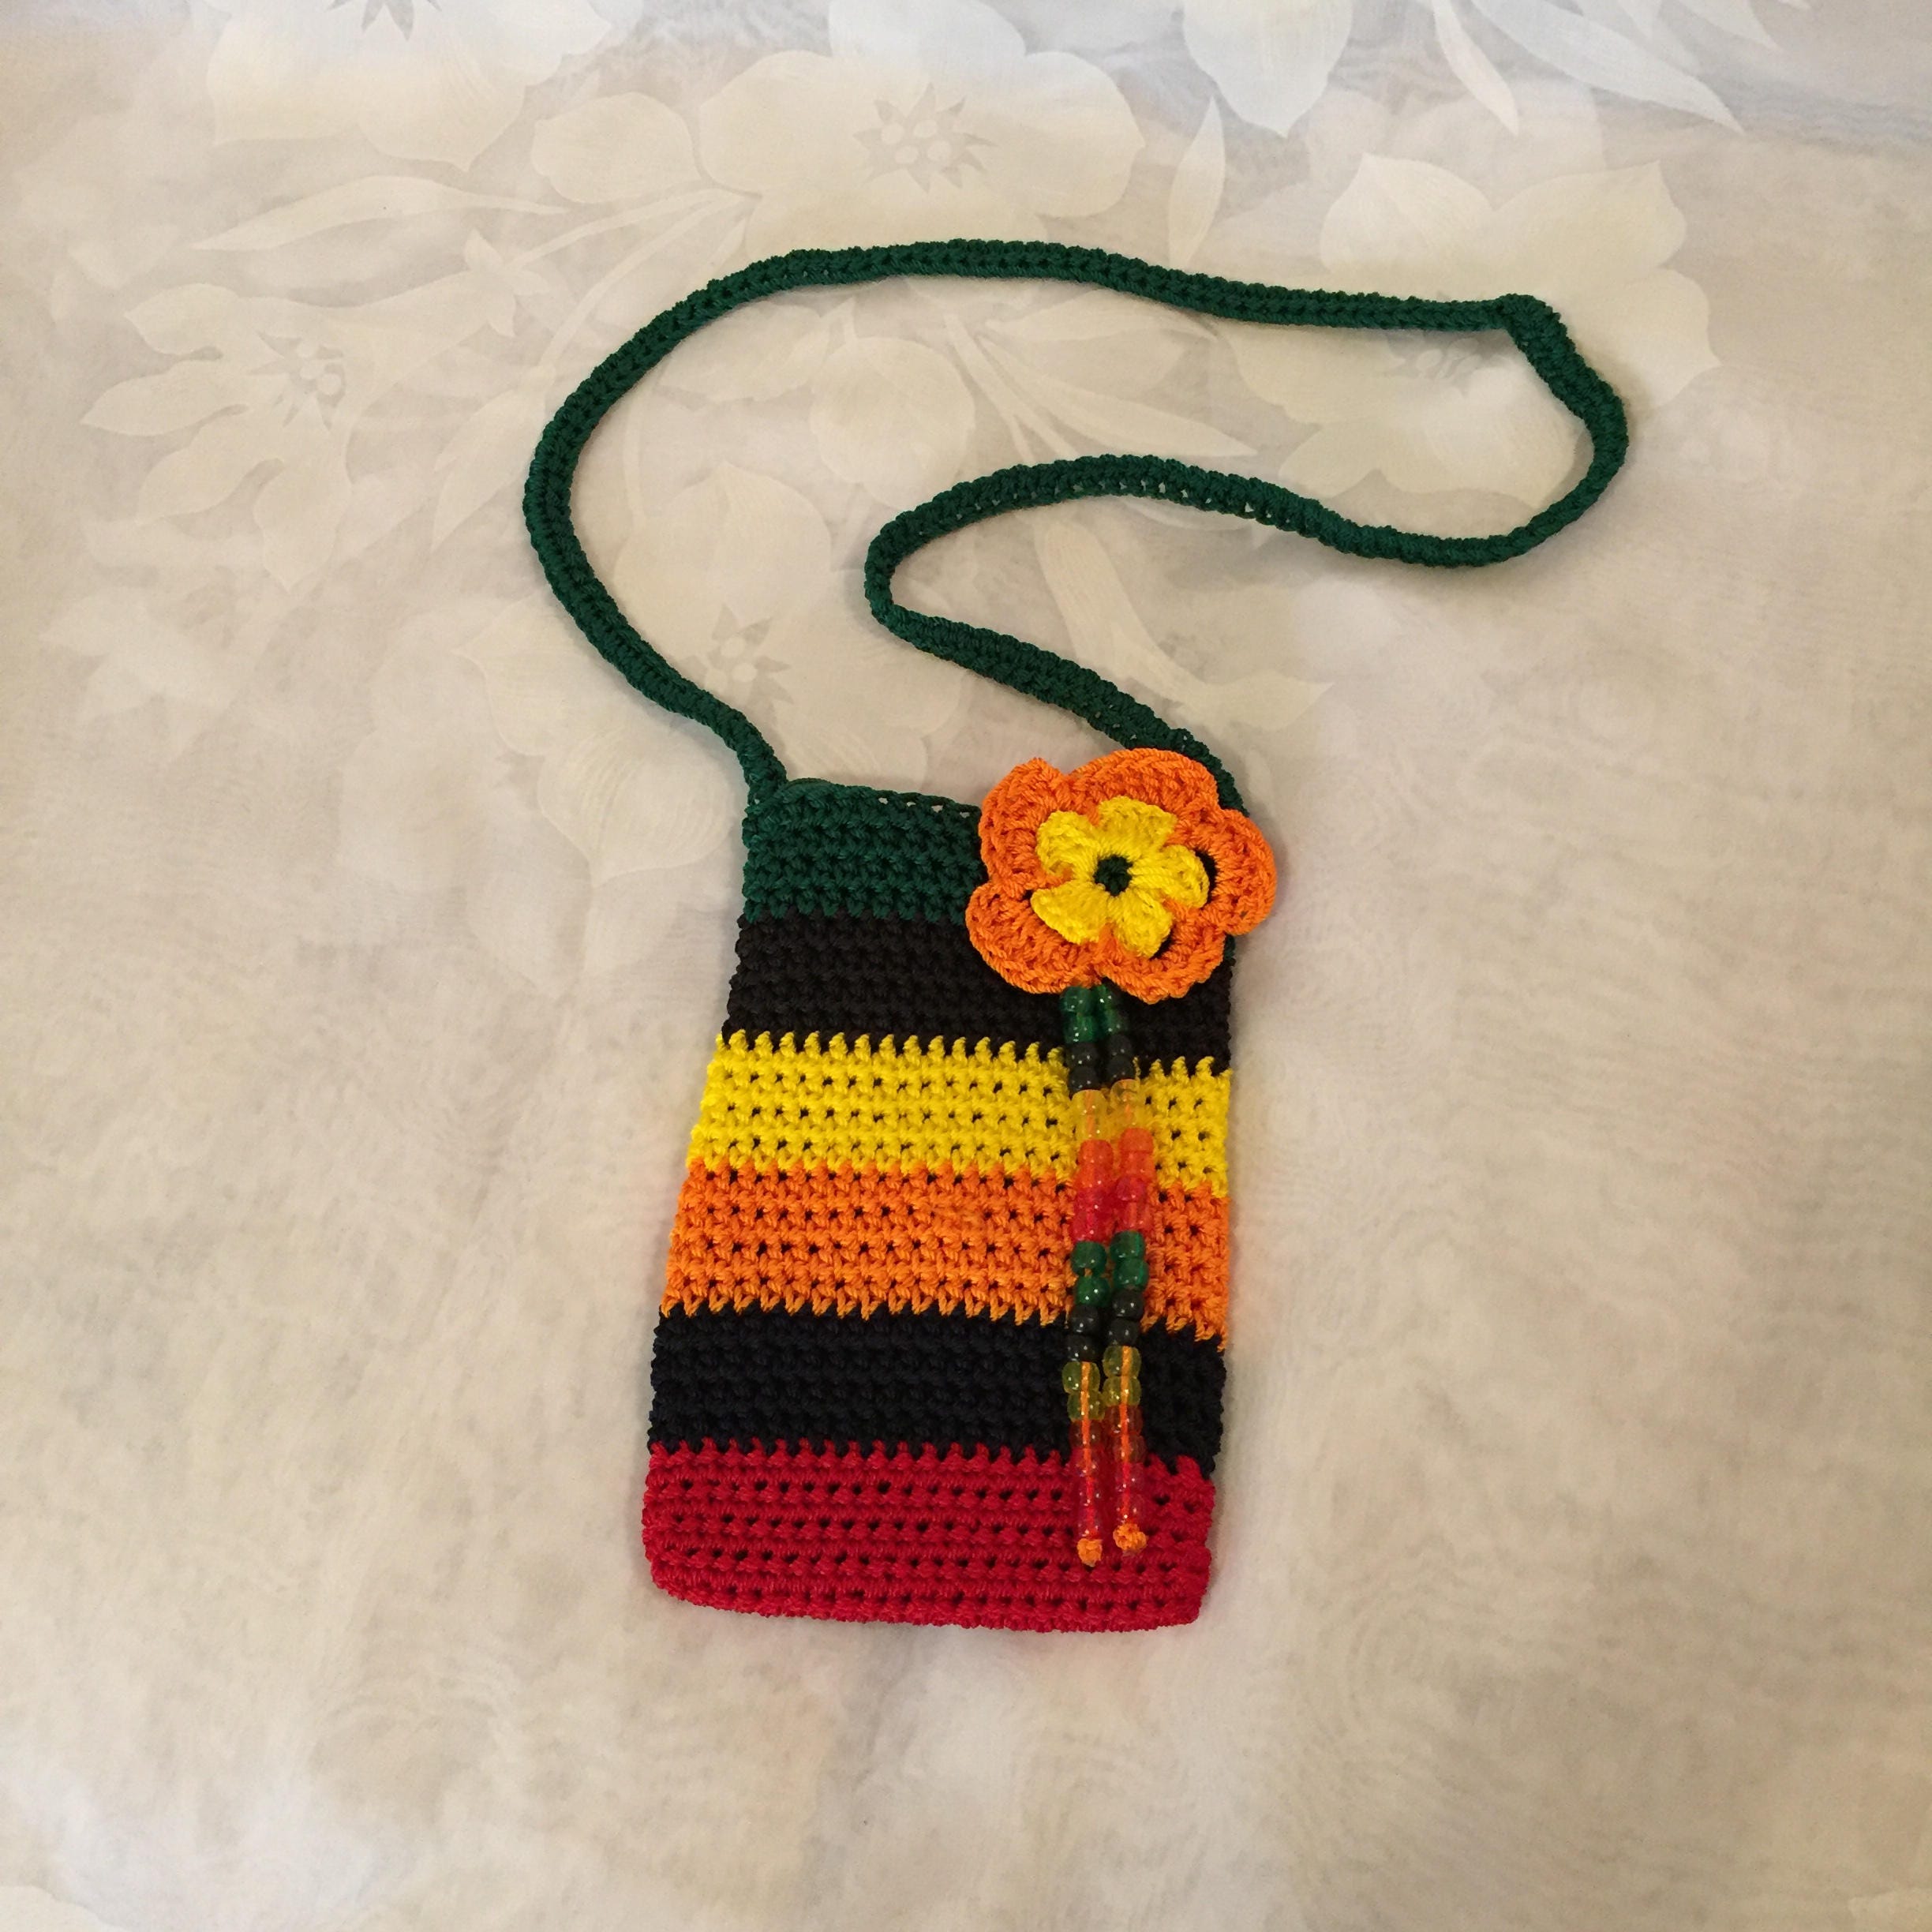 Crocheted Cell Phone Pouch